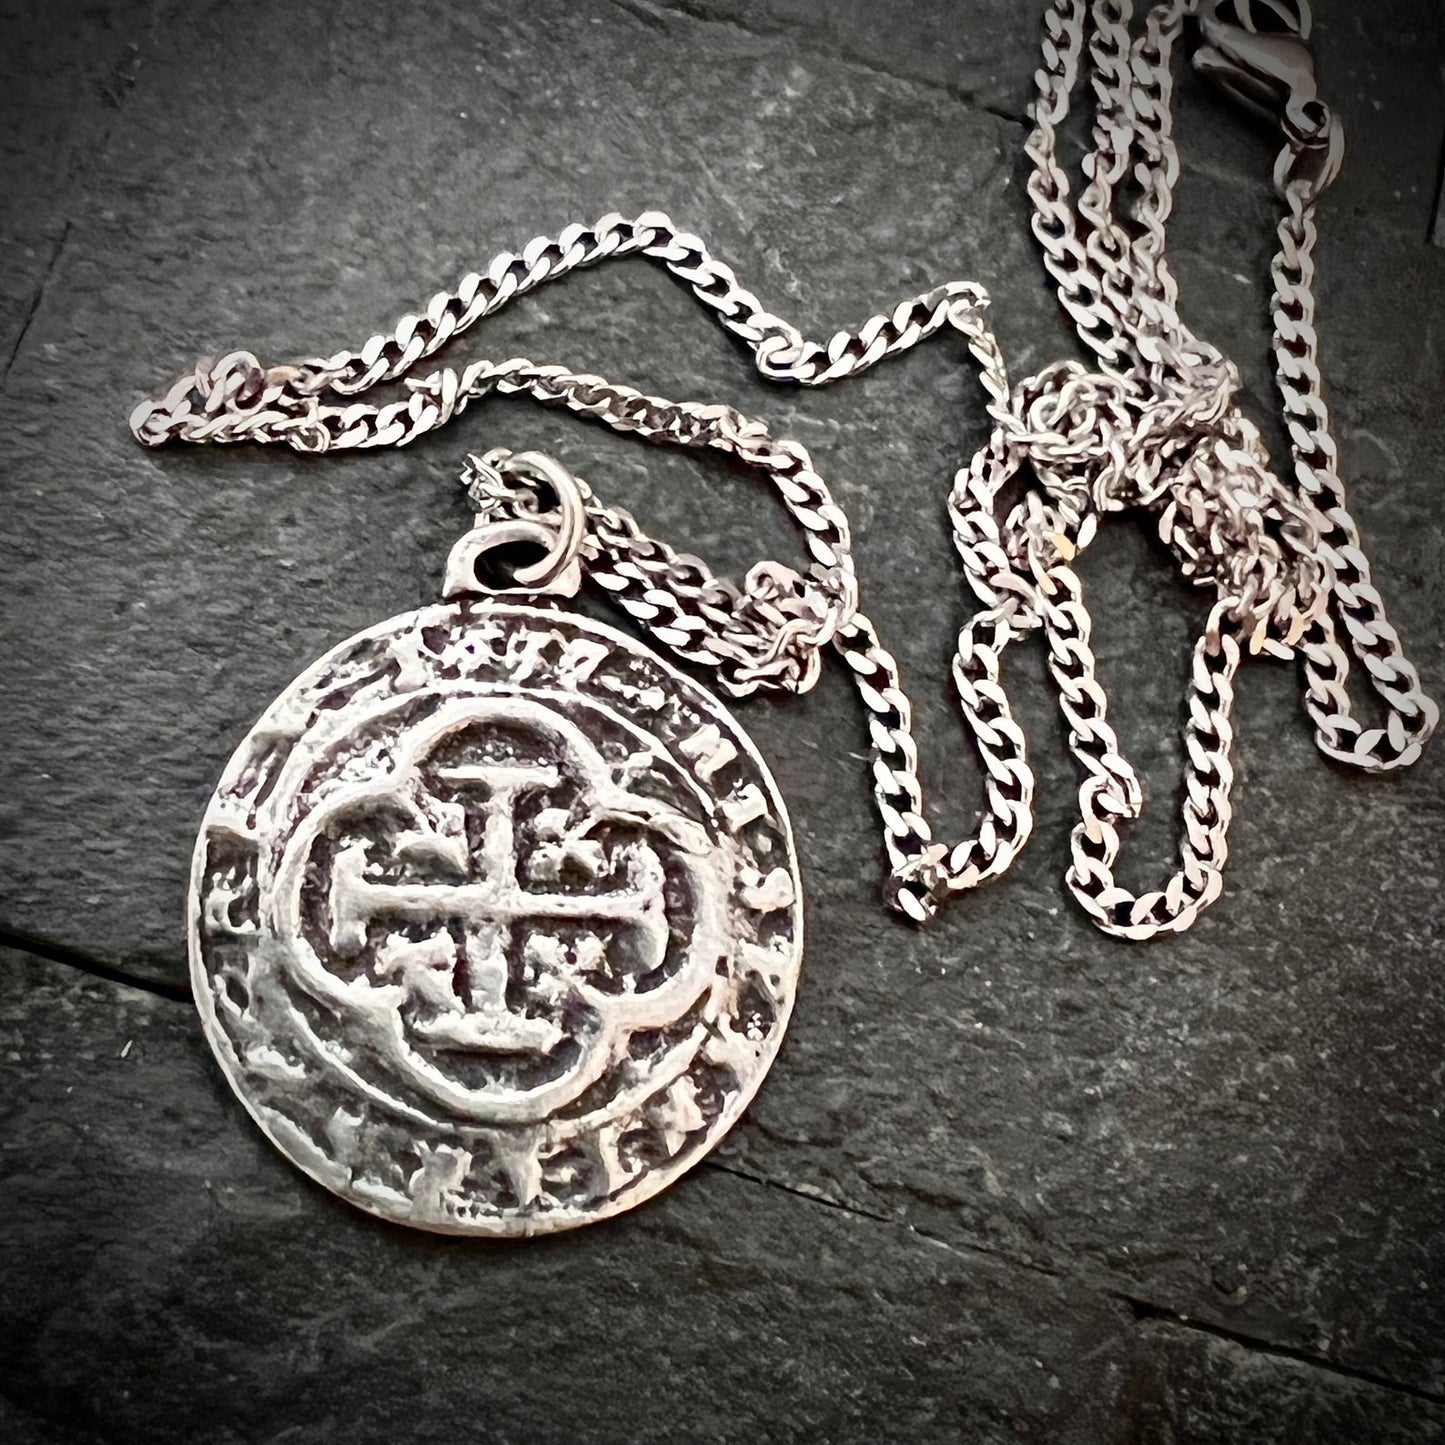 Old Spanish Doubloon Coin Men's Necklace, Shipwreck Pirate Cross Pendant Stainless Steel and Pewter Medal, Unisex Jewelry, ST-041 Johnny LTD